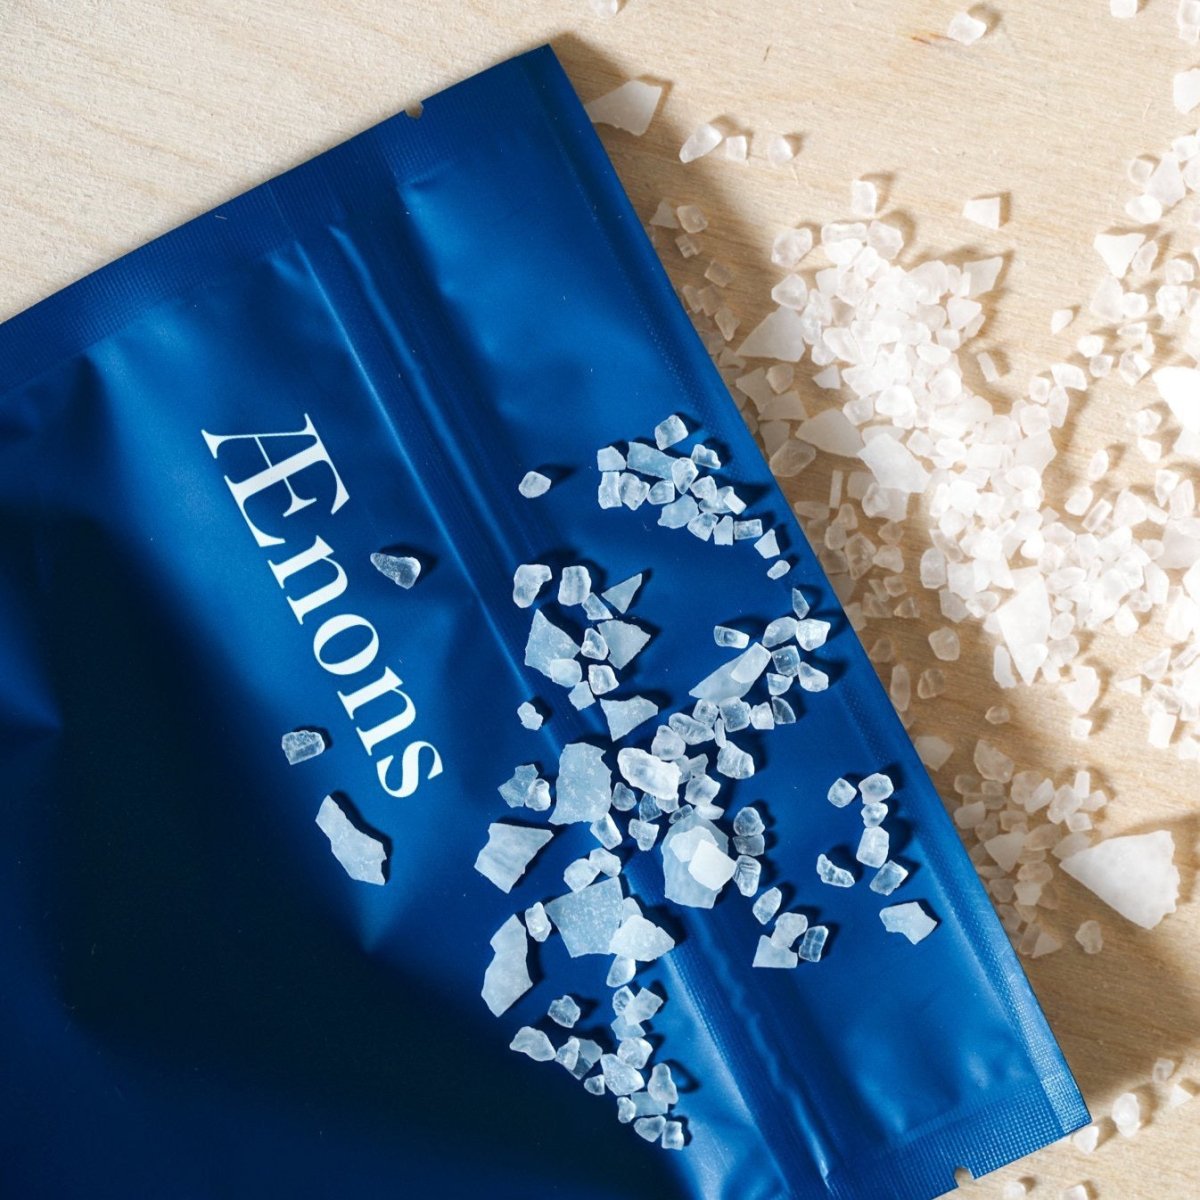 A bright blue open package spills out mineral bath salts. The After Hours Mineral Bath Soak with Lavender + Jasmine Extracts is crafted by Aenons and made in Los Angeles, CA.